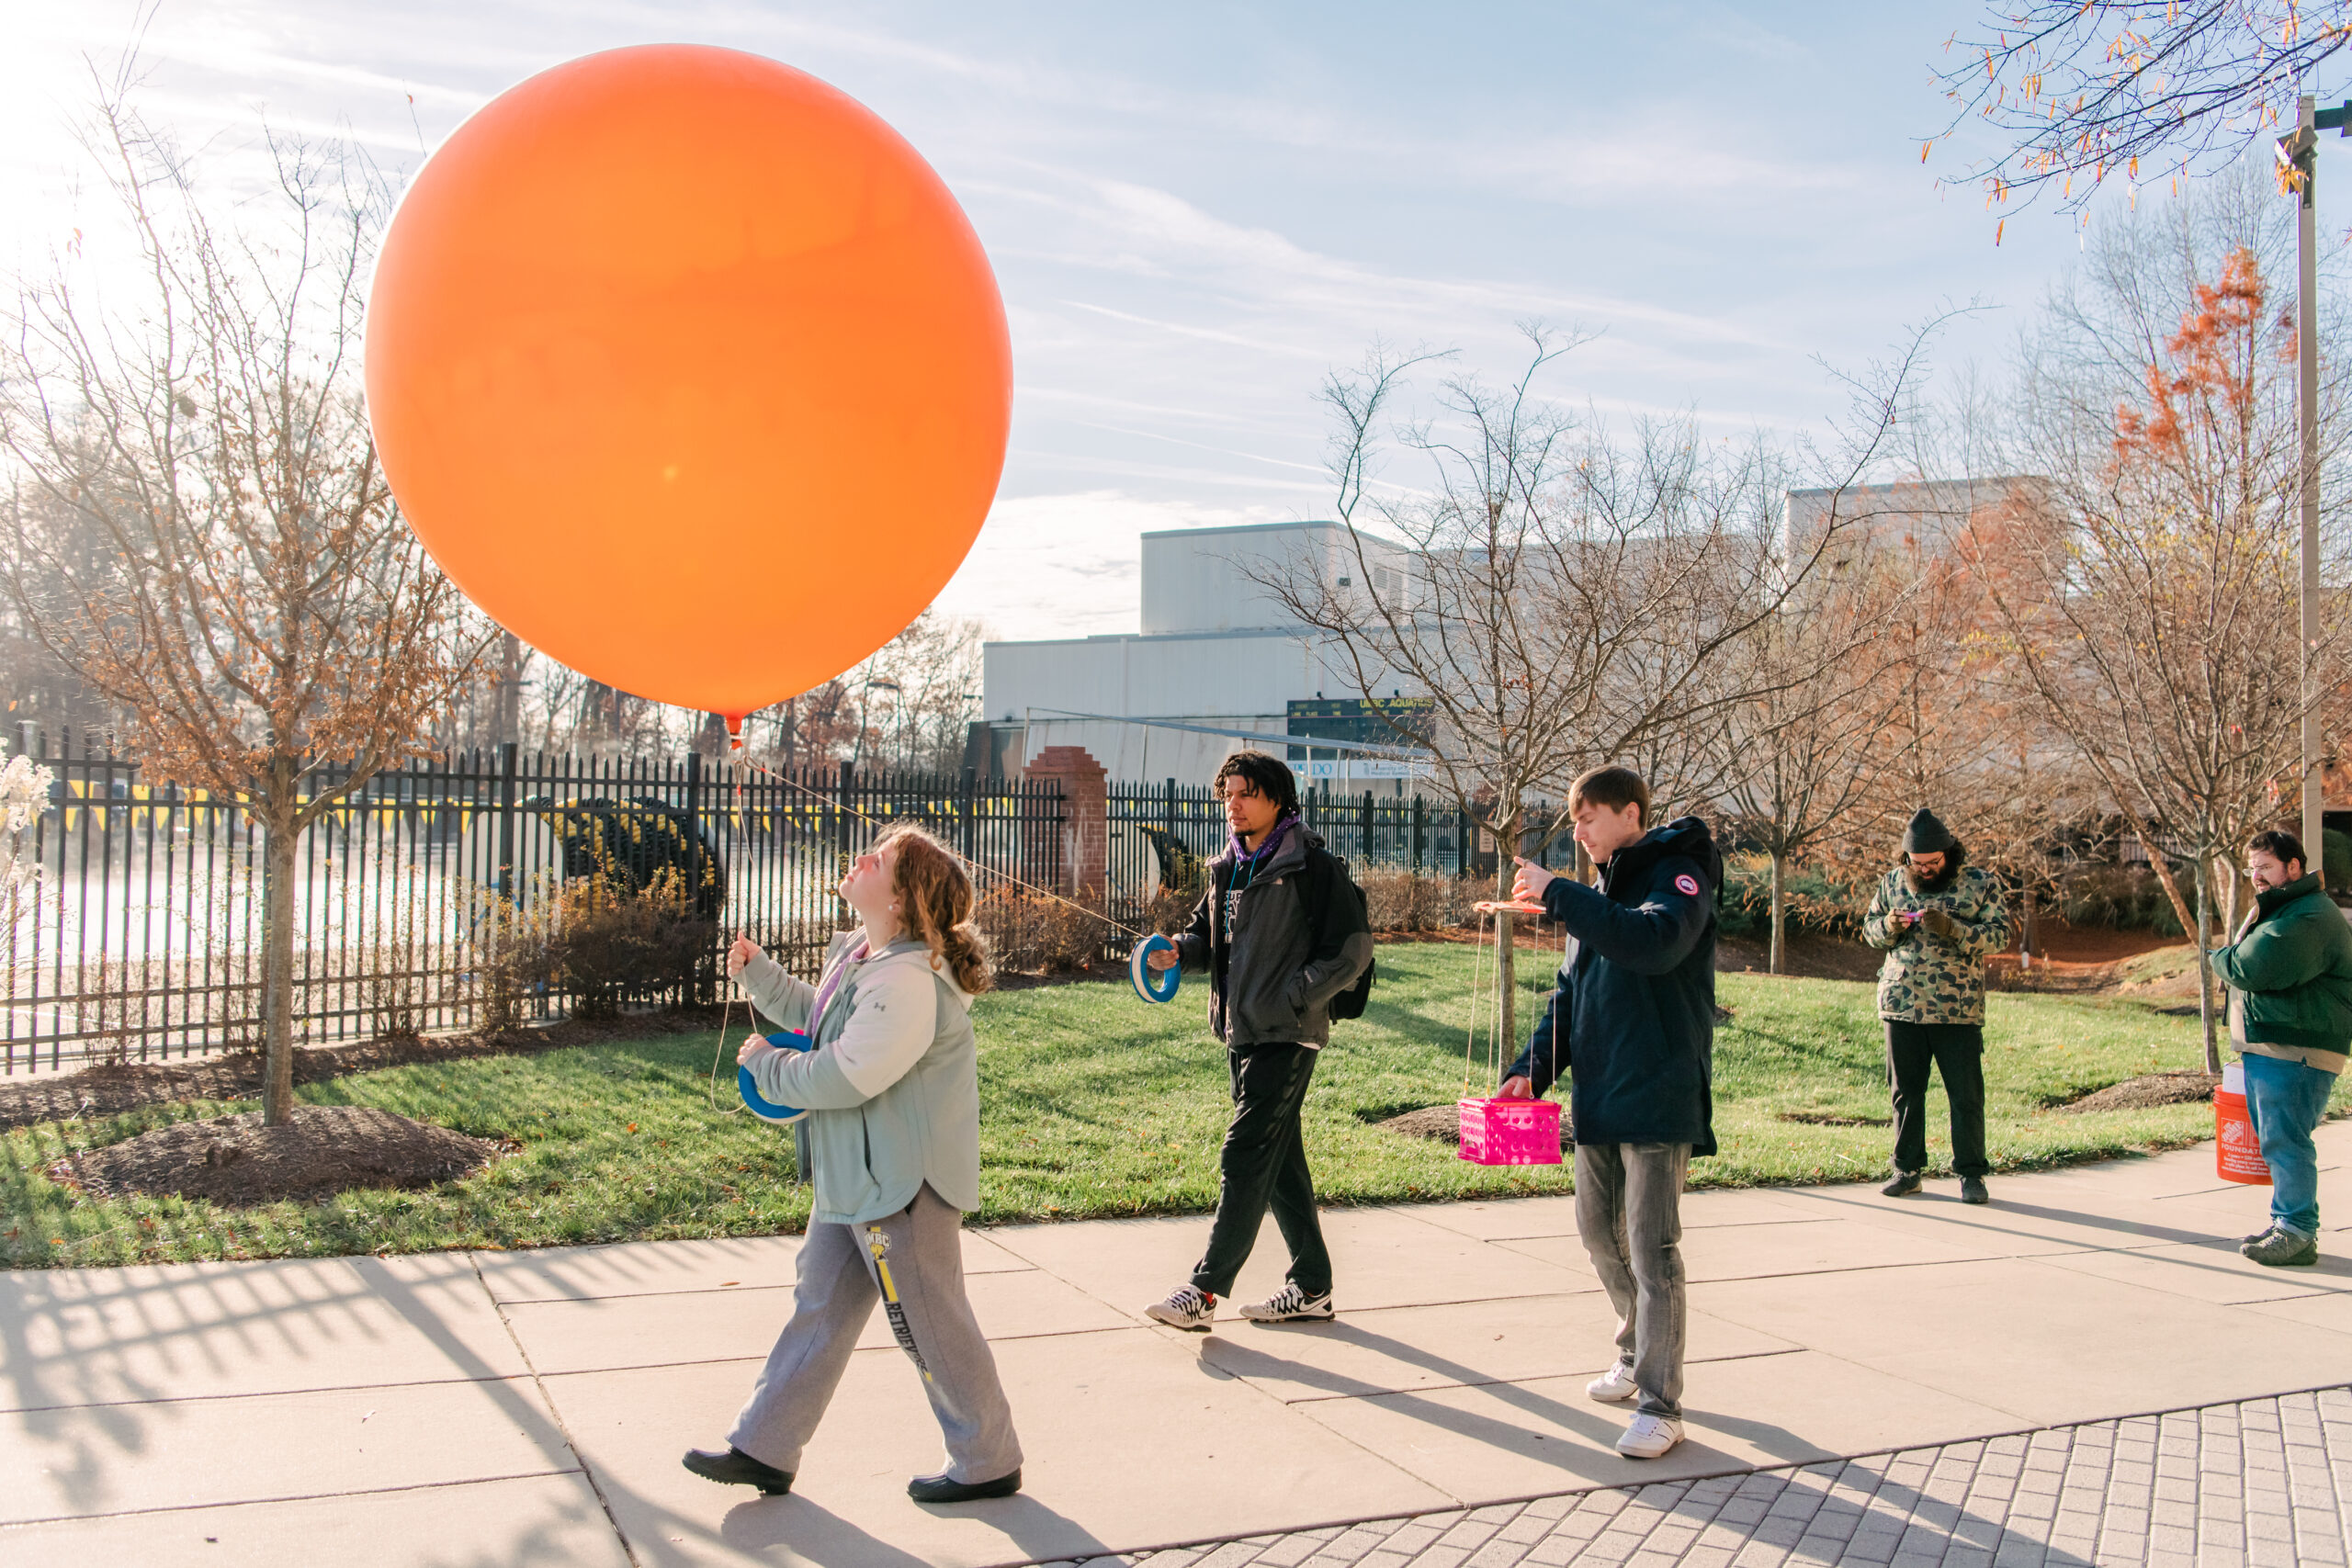 Getting Your Research Off the Ground—Balloons Give Students New Perspectives